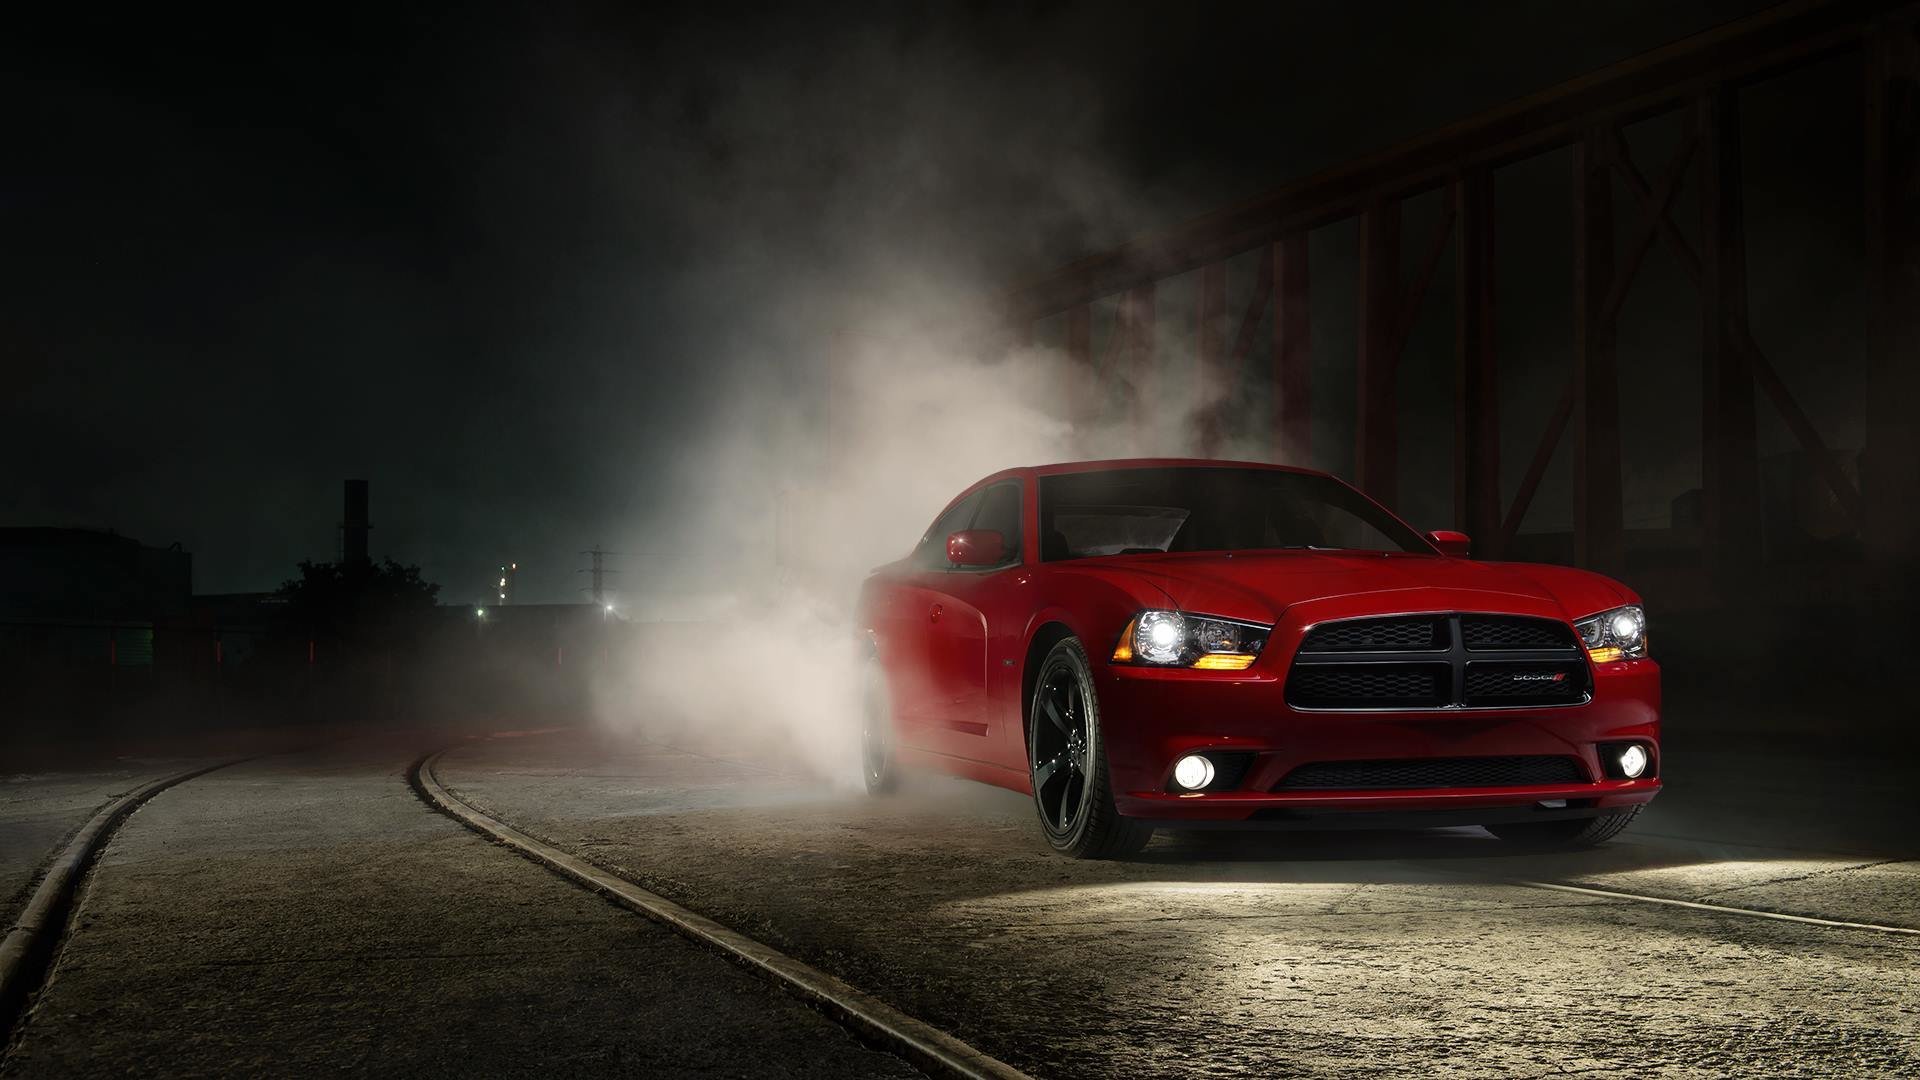 Best Dodge Charger wallpaper ID:451972 for High Resolution hd 1080p computer